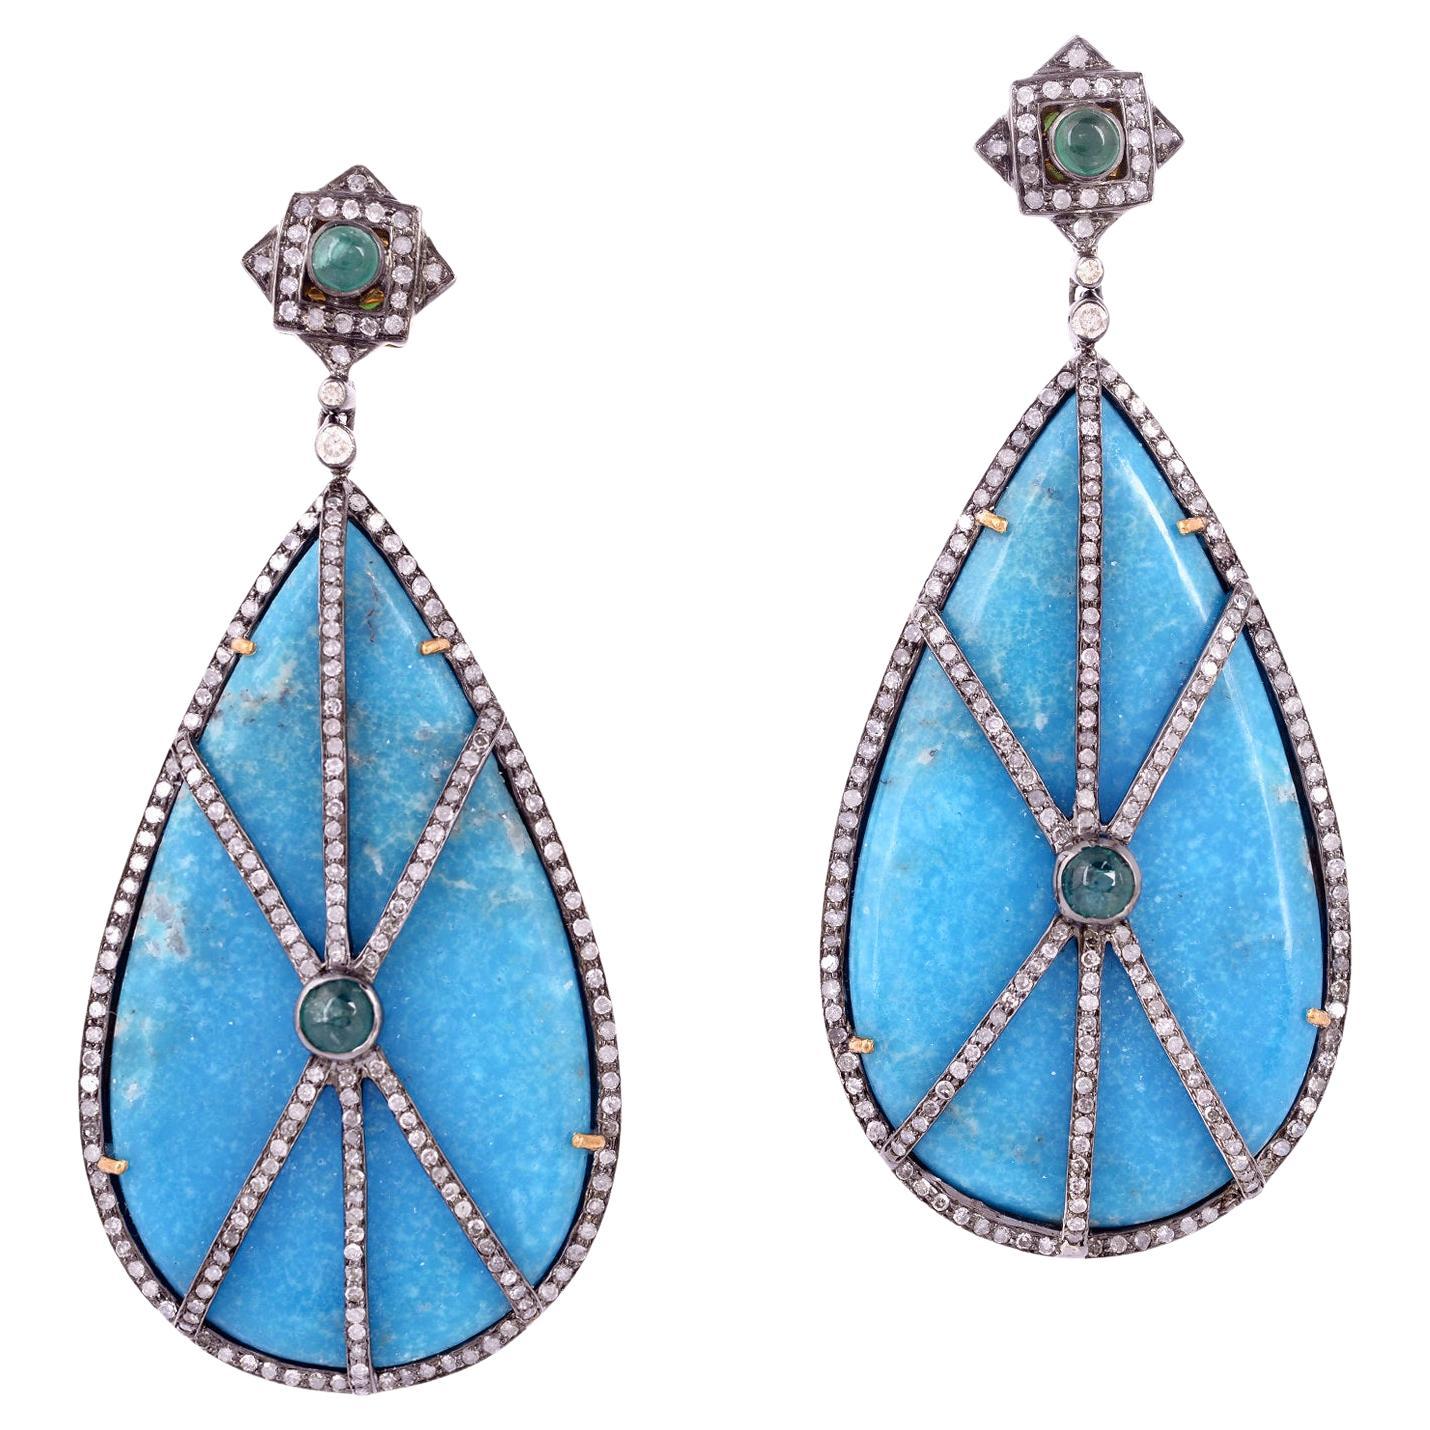 Tear Drop Shaped Turquoise Dangle Earrings Equipped With Emeralds & Diamonds For Sale